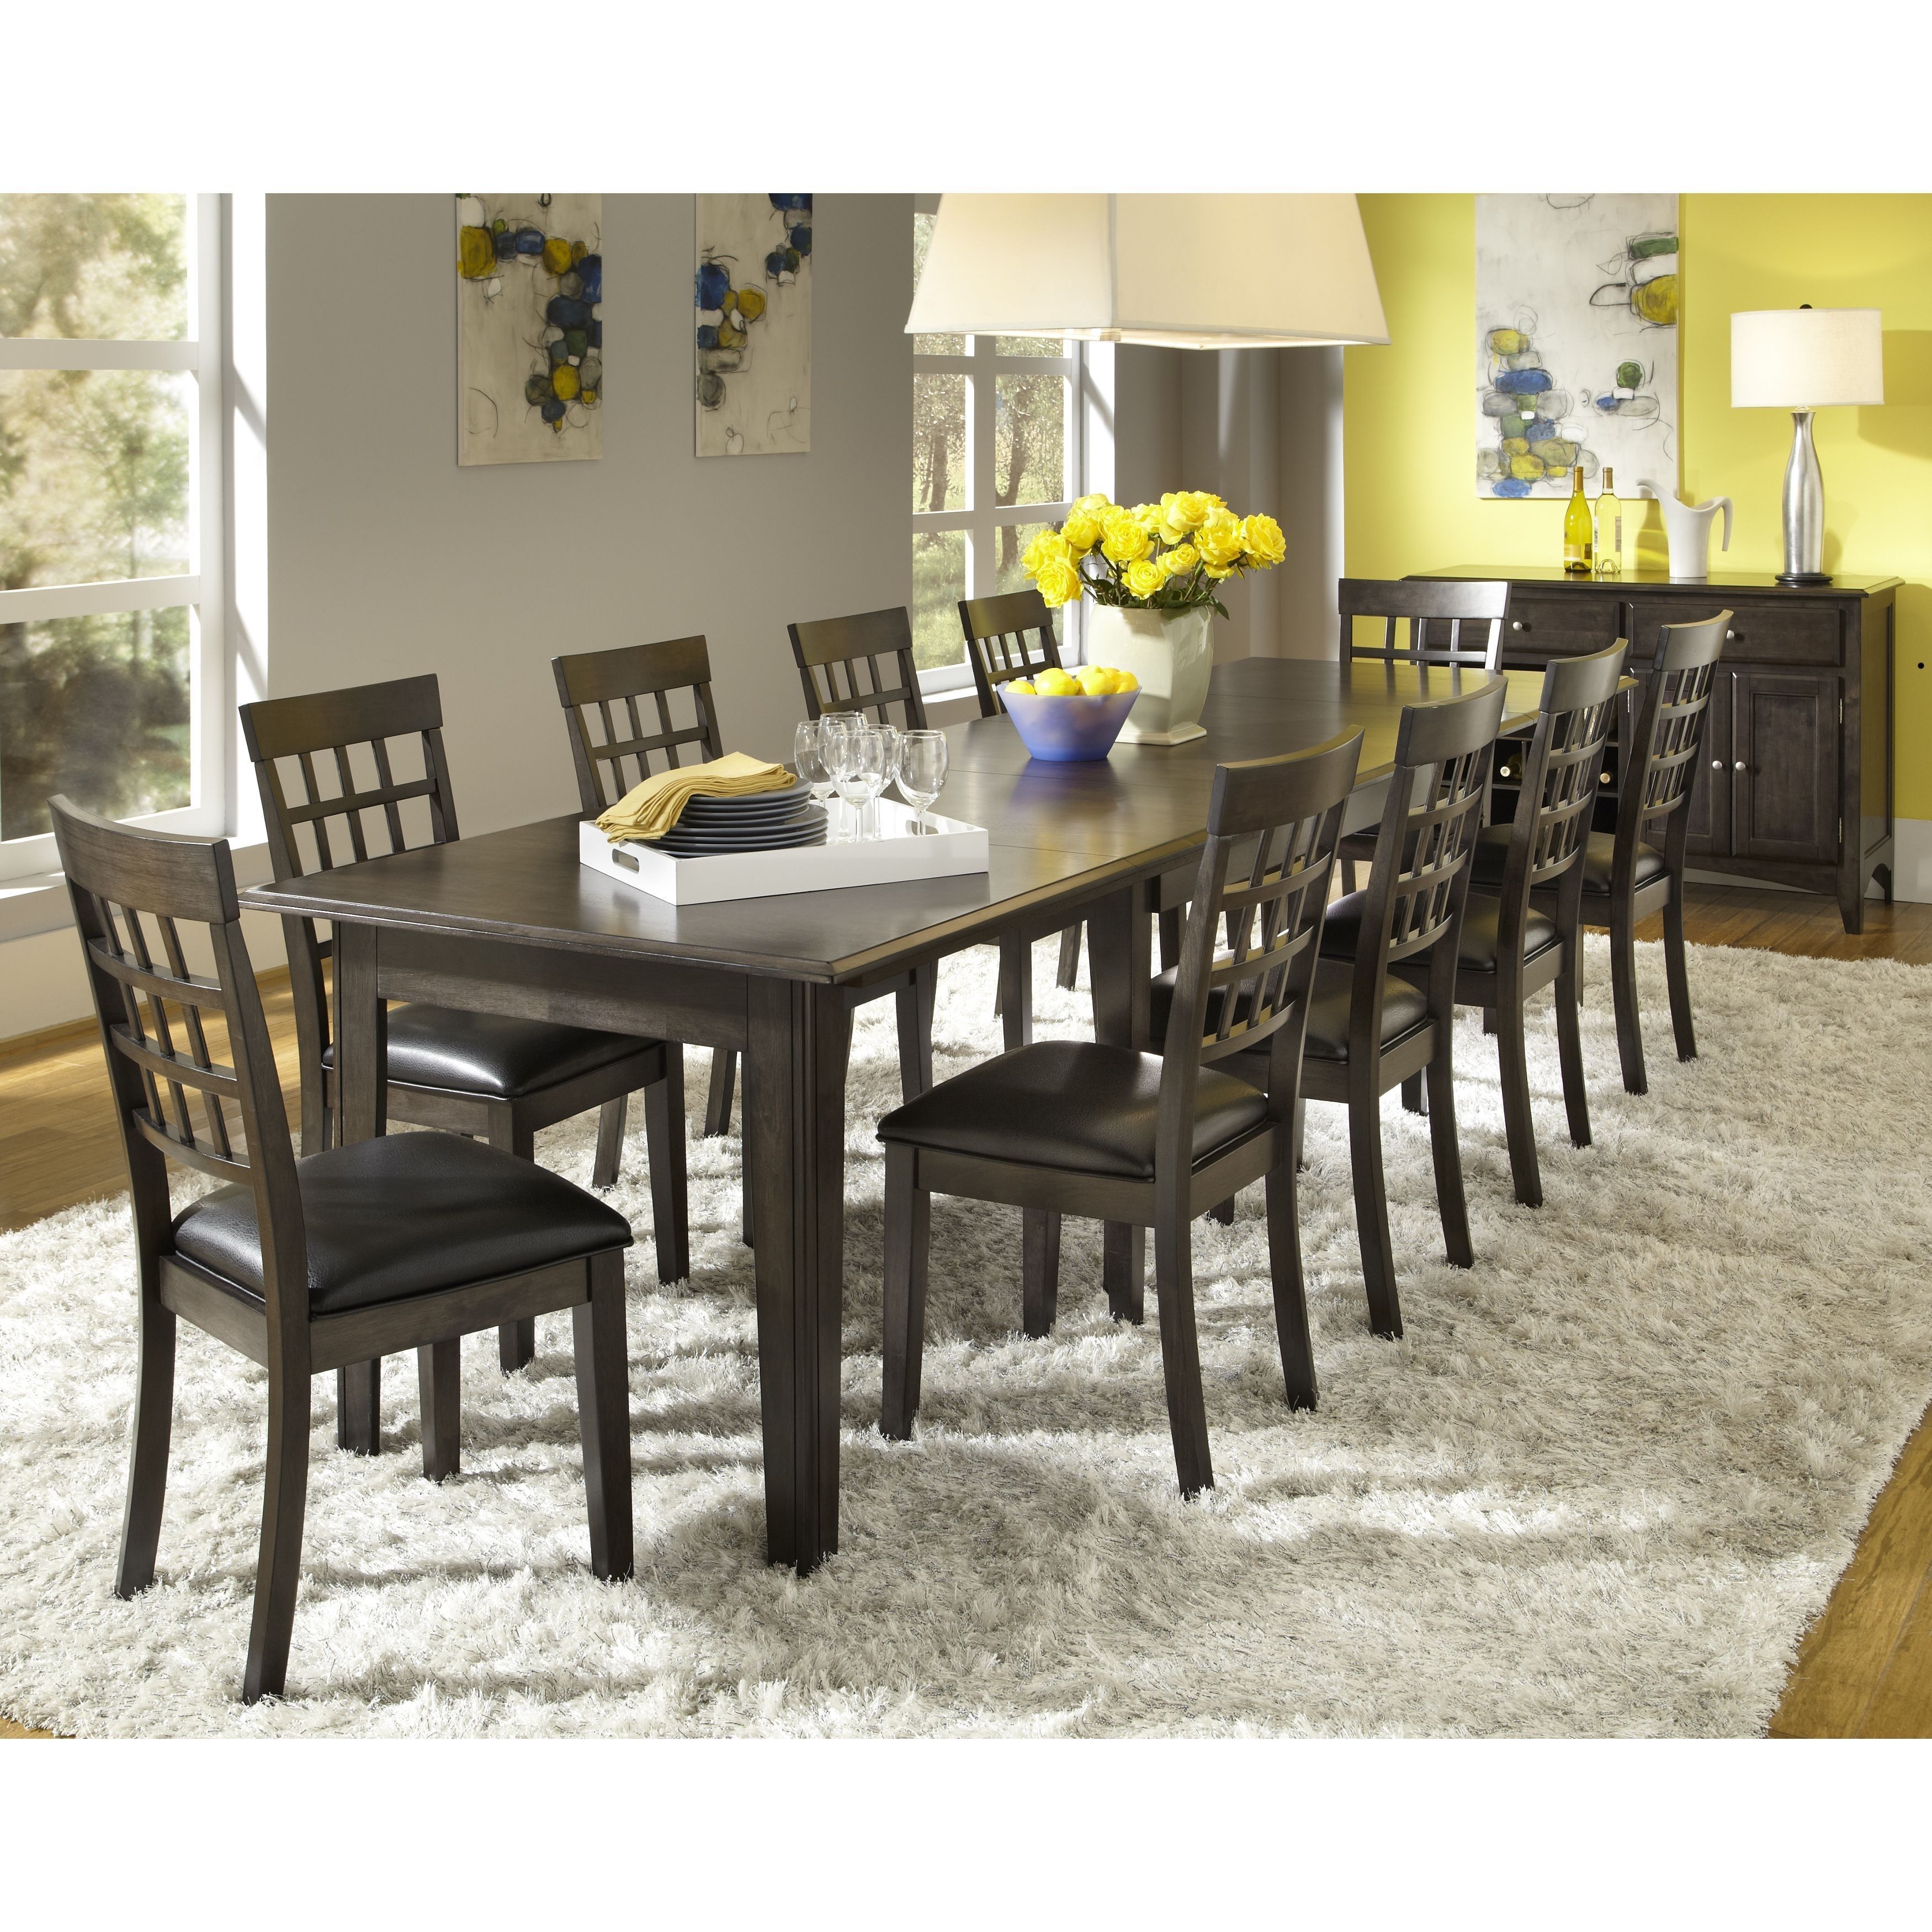 Simply Solid Corina Solid Wood 10 Piece Dining Collection (Dining Intended For Current Norwood 6 Piece Rectangle Extension Dining Sets (View 5 of 20)